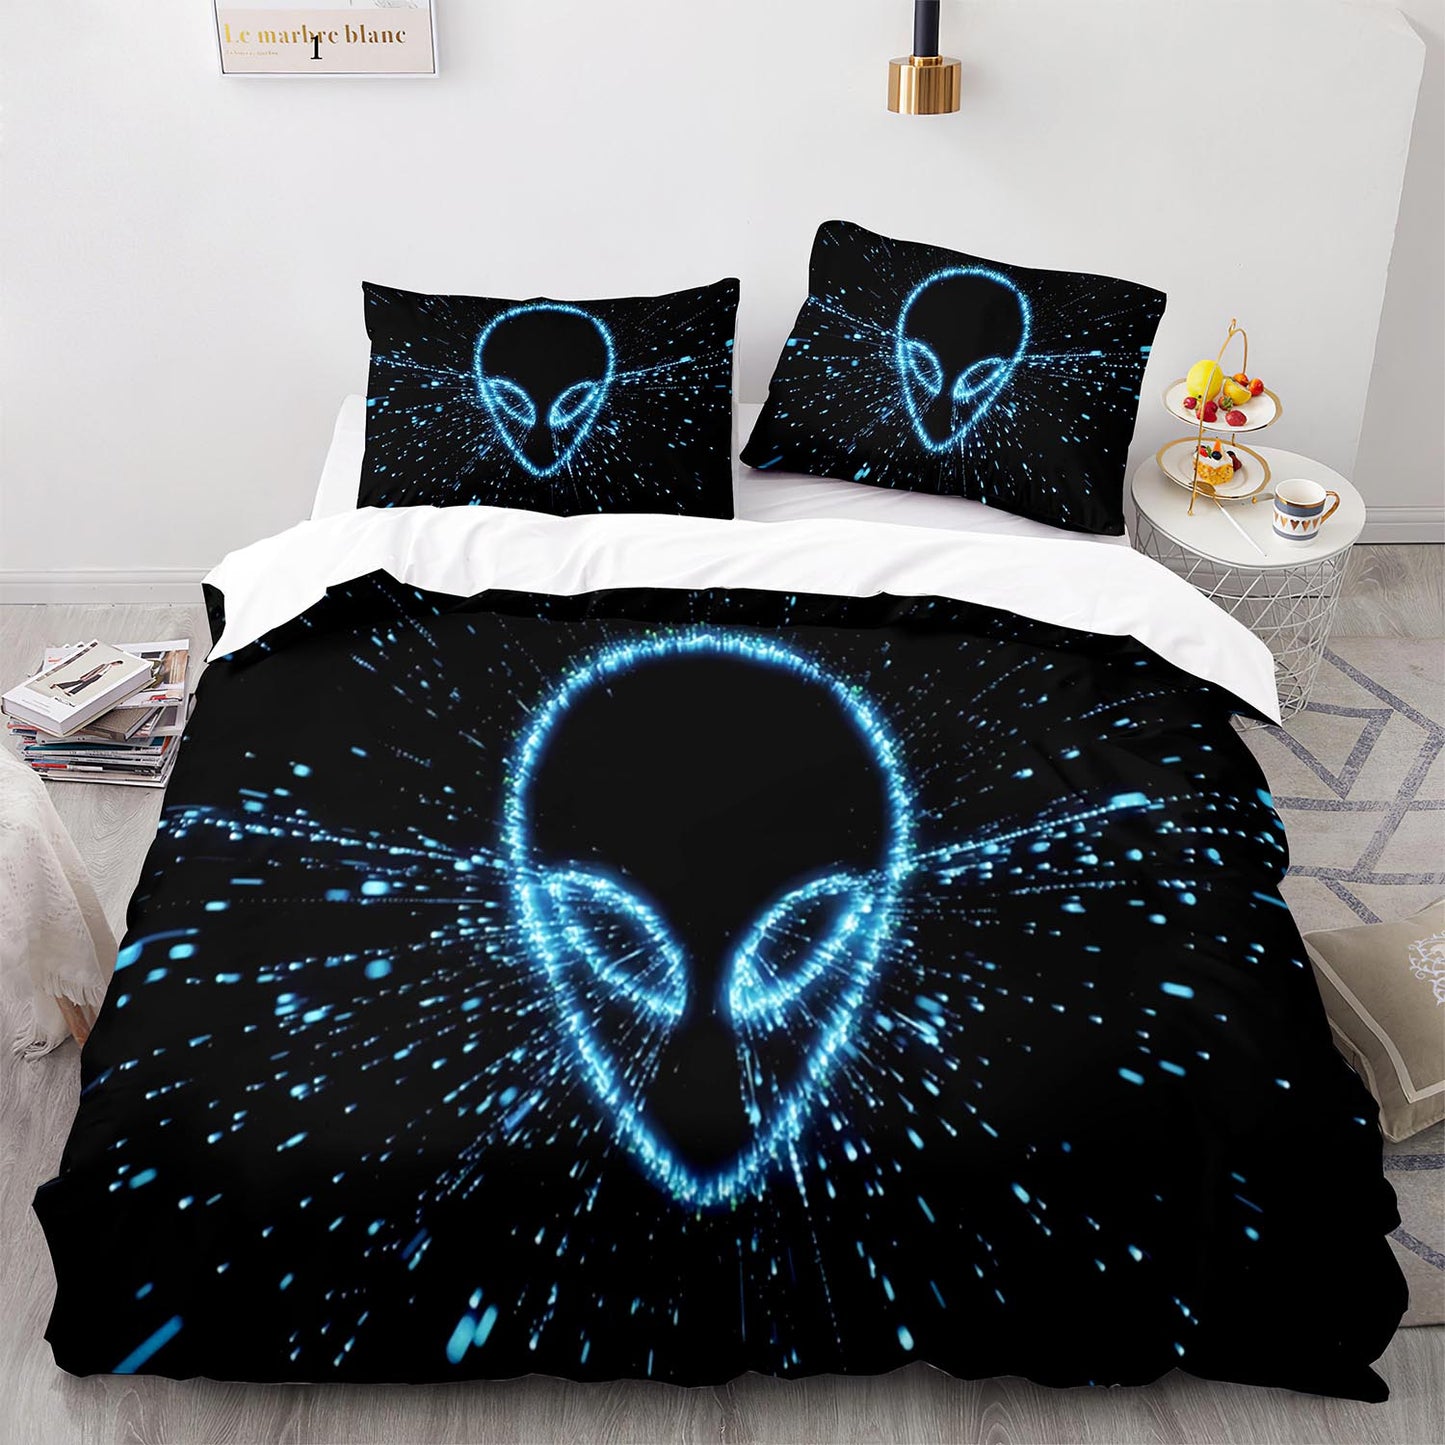 Cutom Duvet Cover Set Pattern Chic Comforter Cover King Size for Teens Adults Bedding Set with Pillowcases  WXR1016